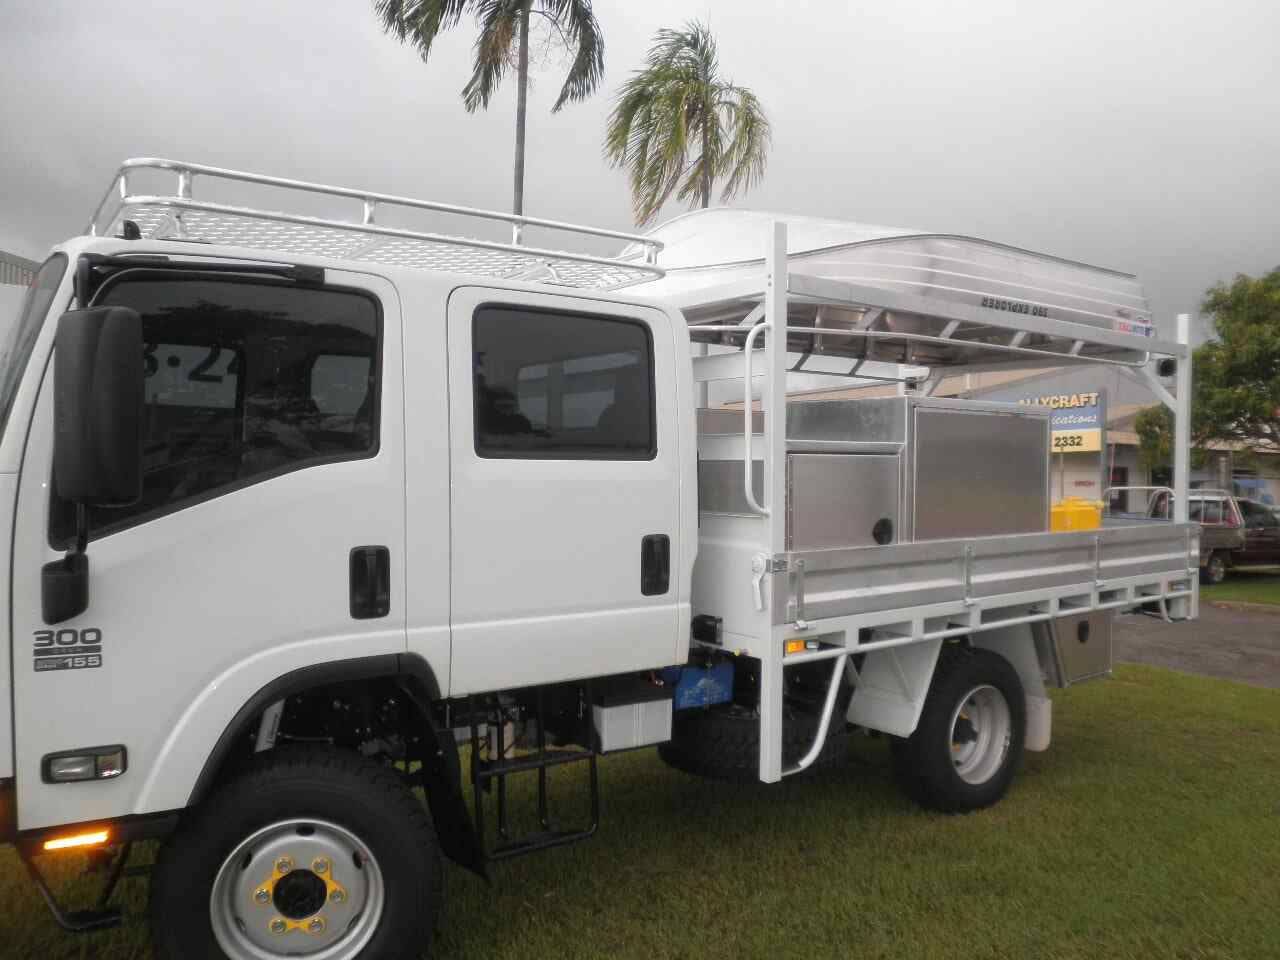 Mick Deltareef — Allycraft Modifications Aluminum Welding Fabrication Canopy in Winellie, NT